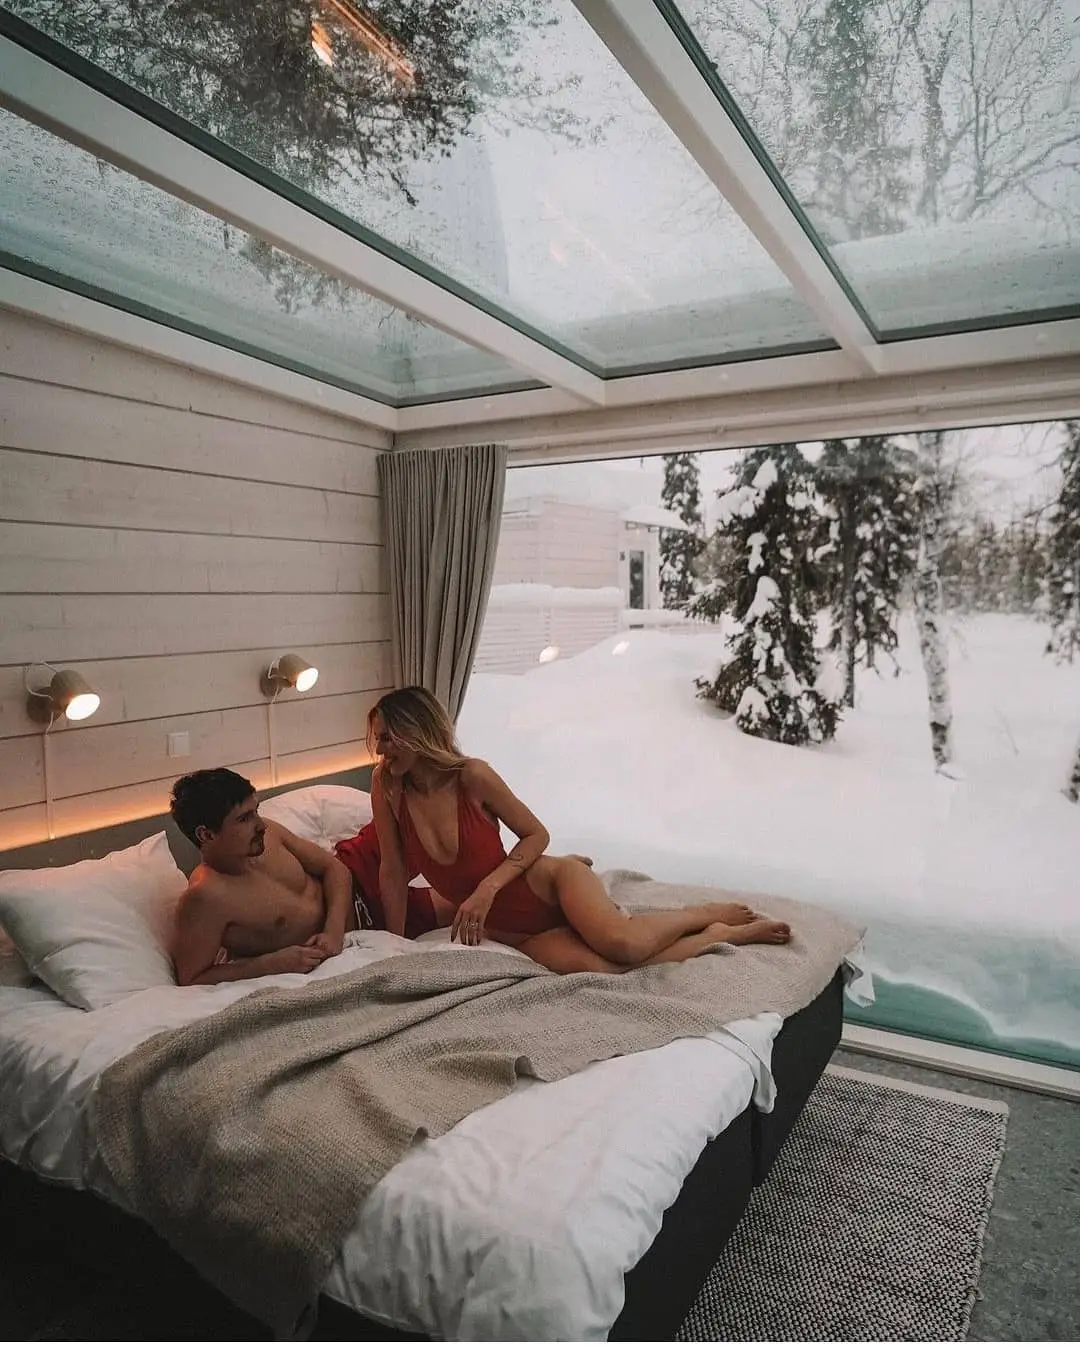 5 Awesome Ways to Get Your Man in the Mood for Love This Winter ...